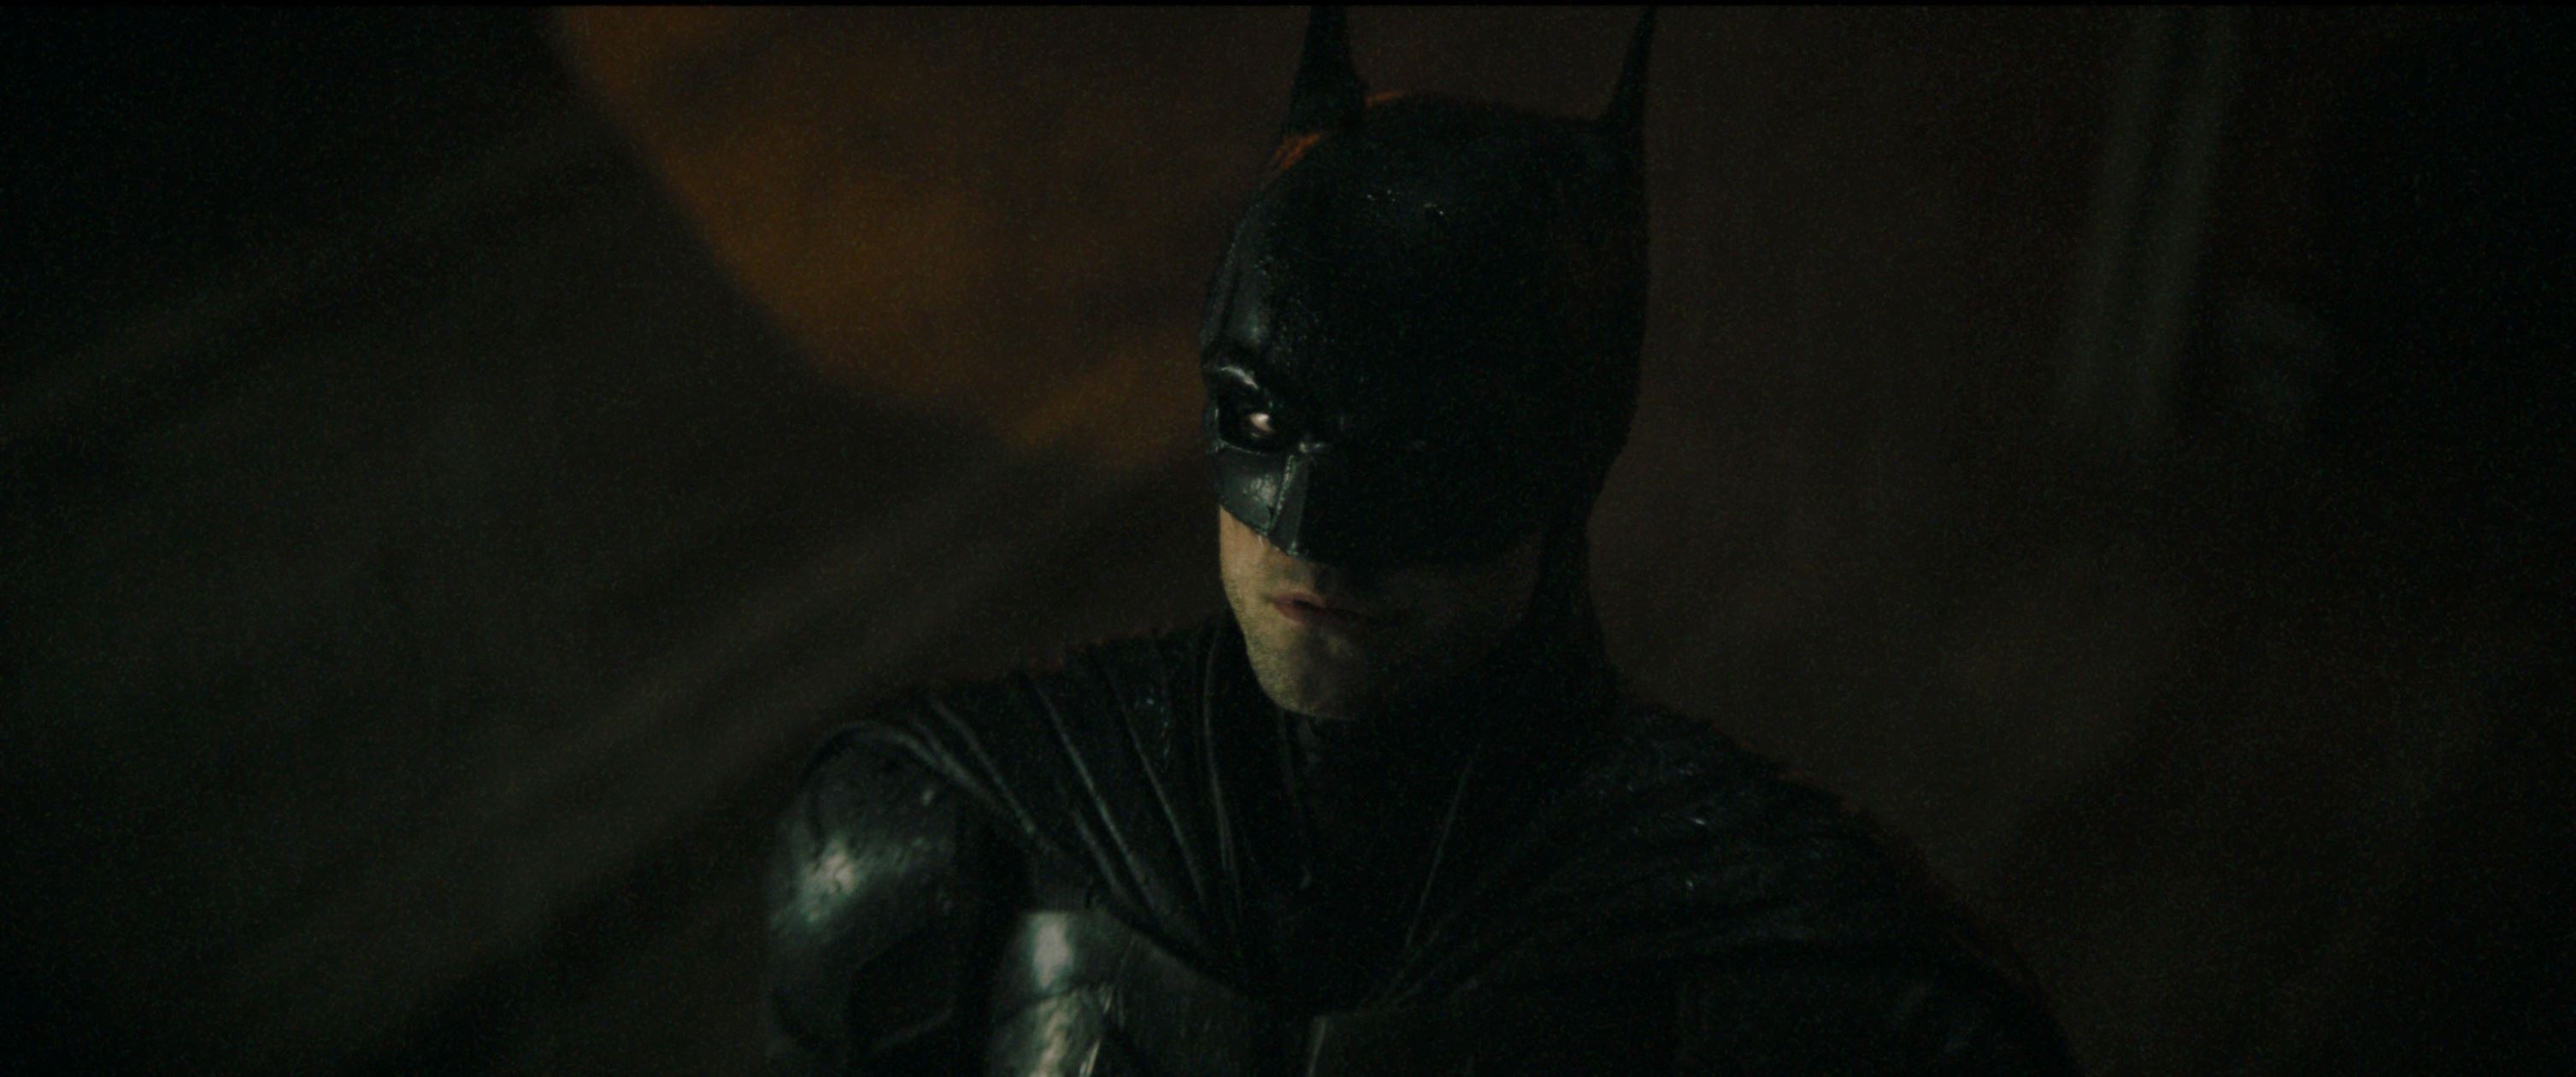 Batman (Robert Pattinson) sees the Bat-signal in the sky over Gotham. Photo courtesy of Warner Bros. Pictures